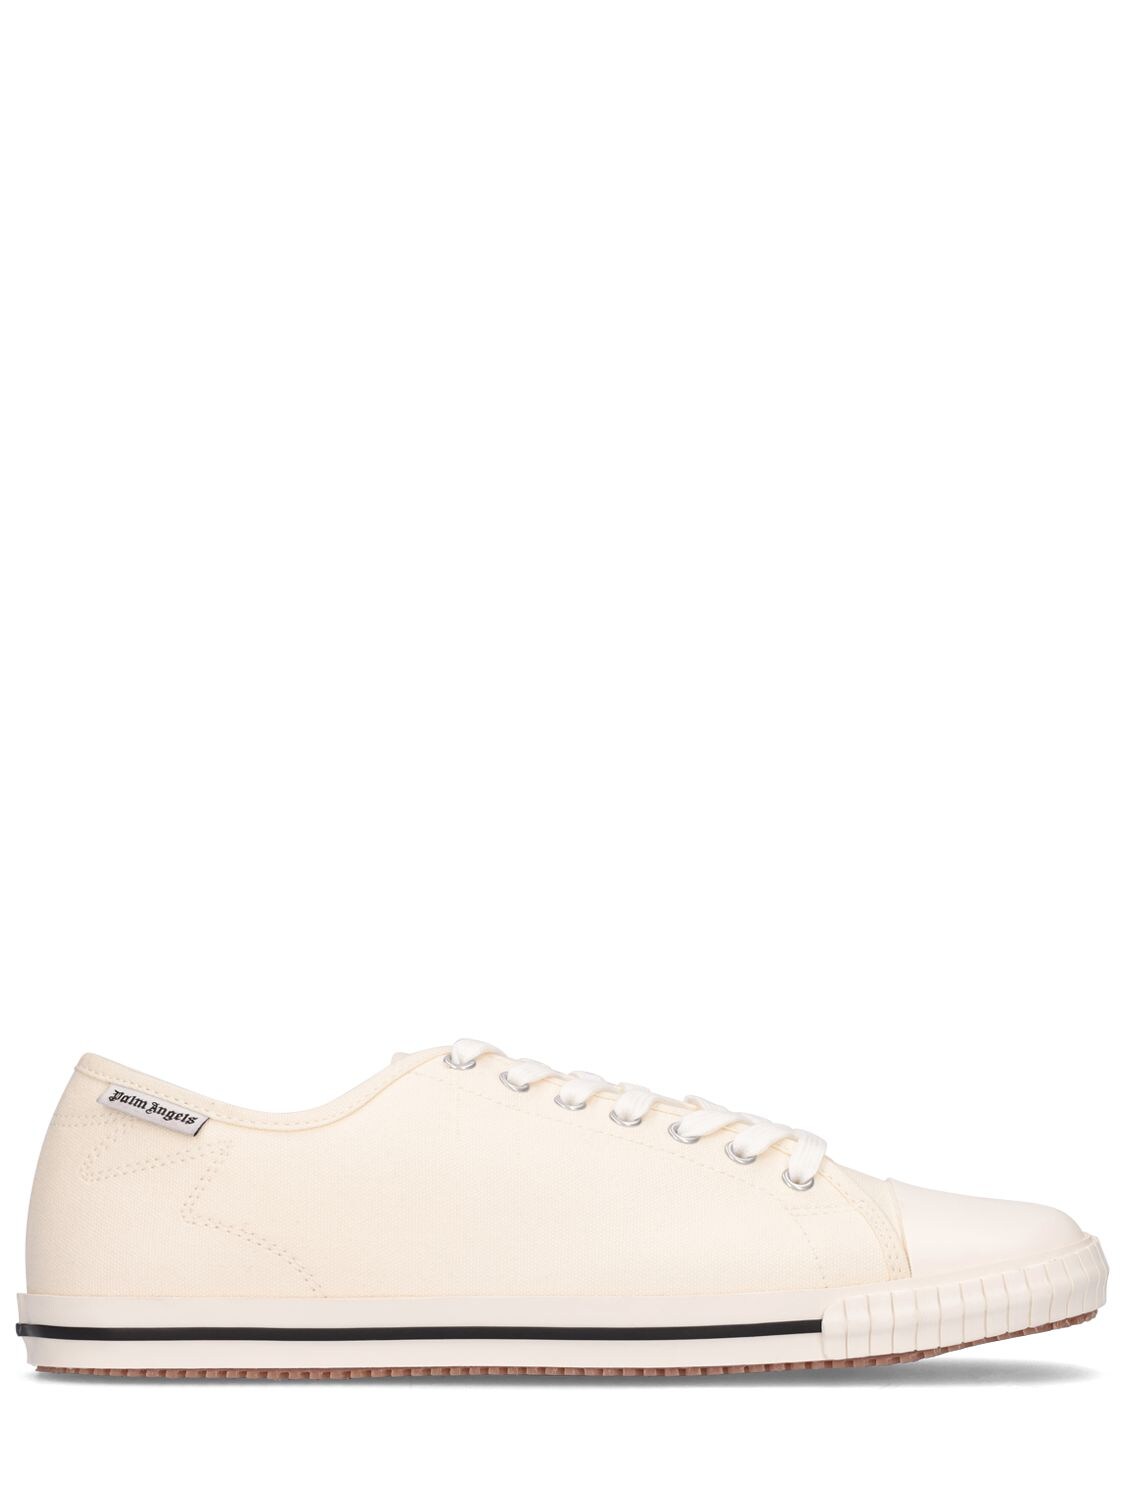 PALM ANGELS SQUARE VULCANIZED COTTON CANVAS SNEAKERS